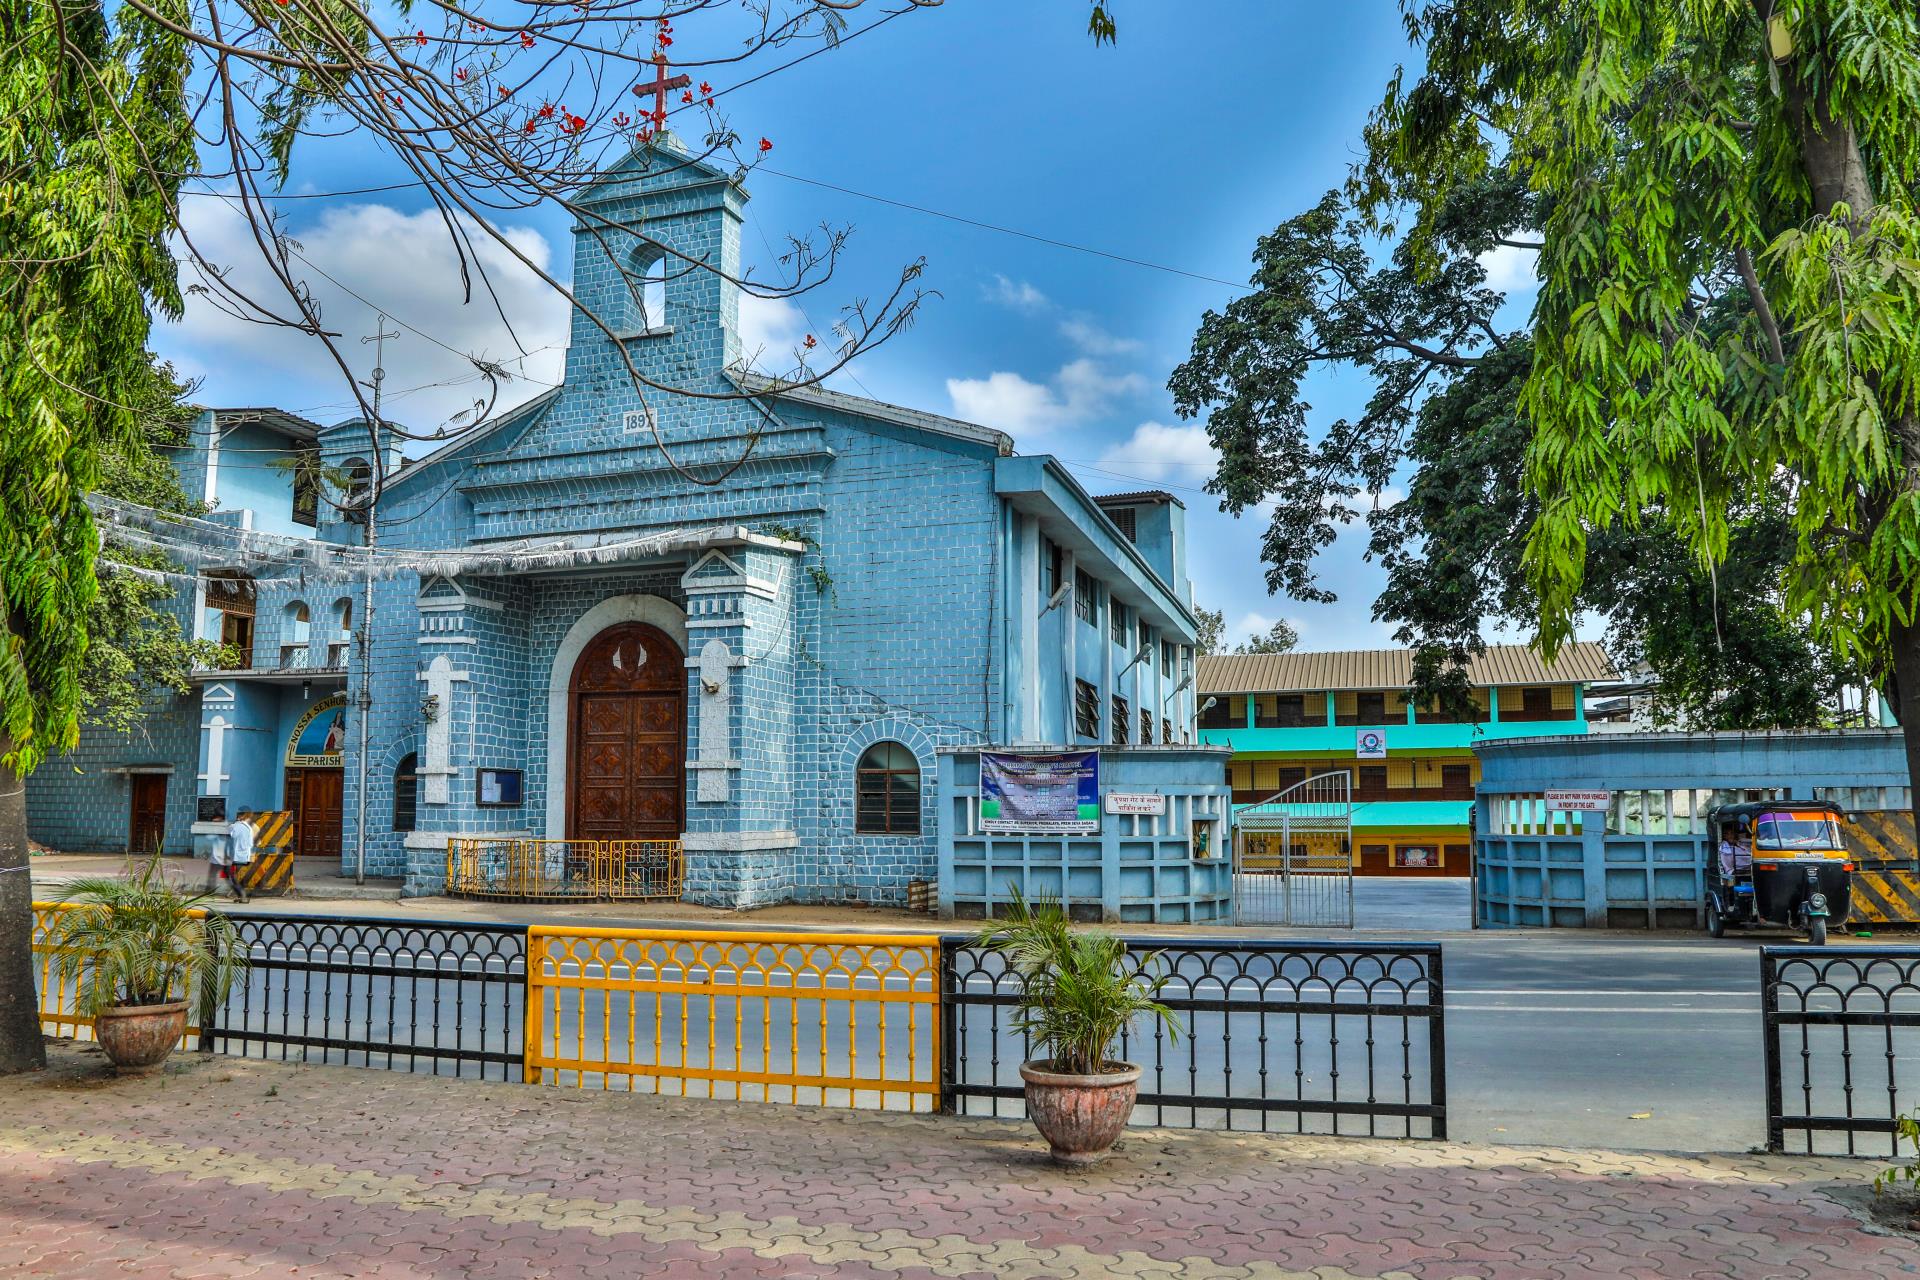 Church of Our Lady of Piety